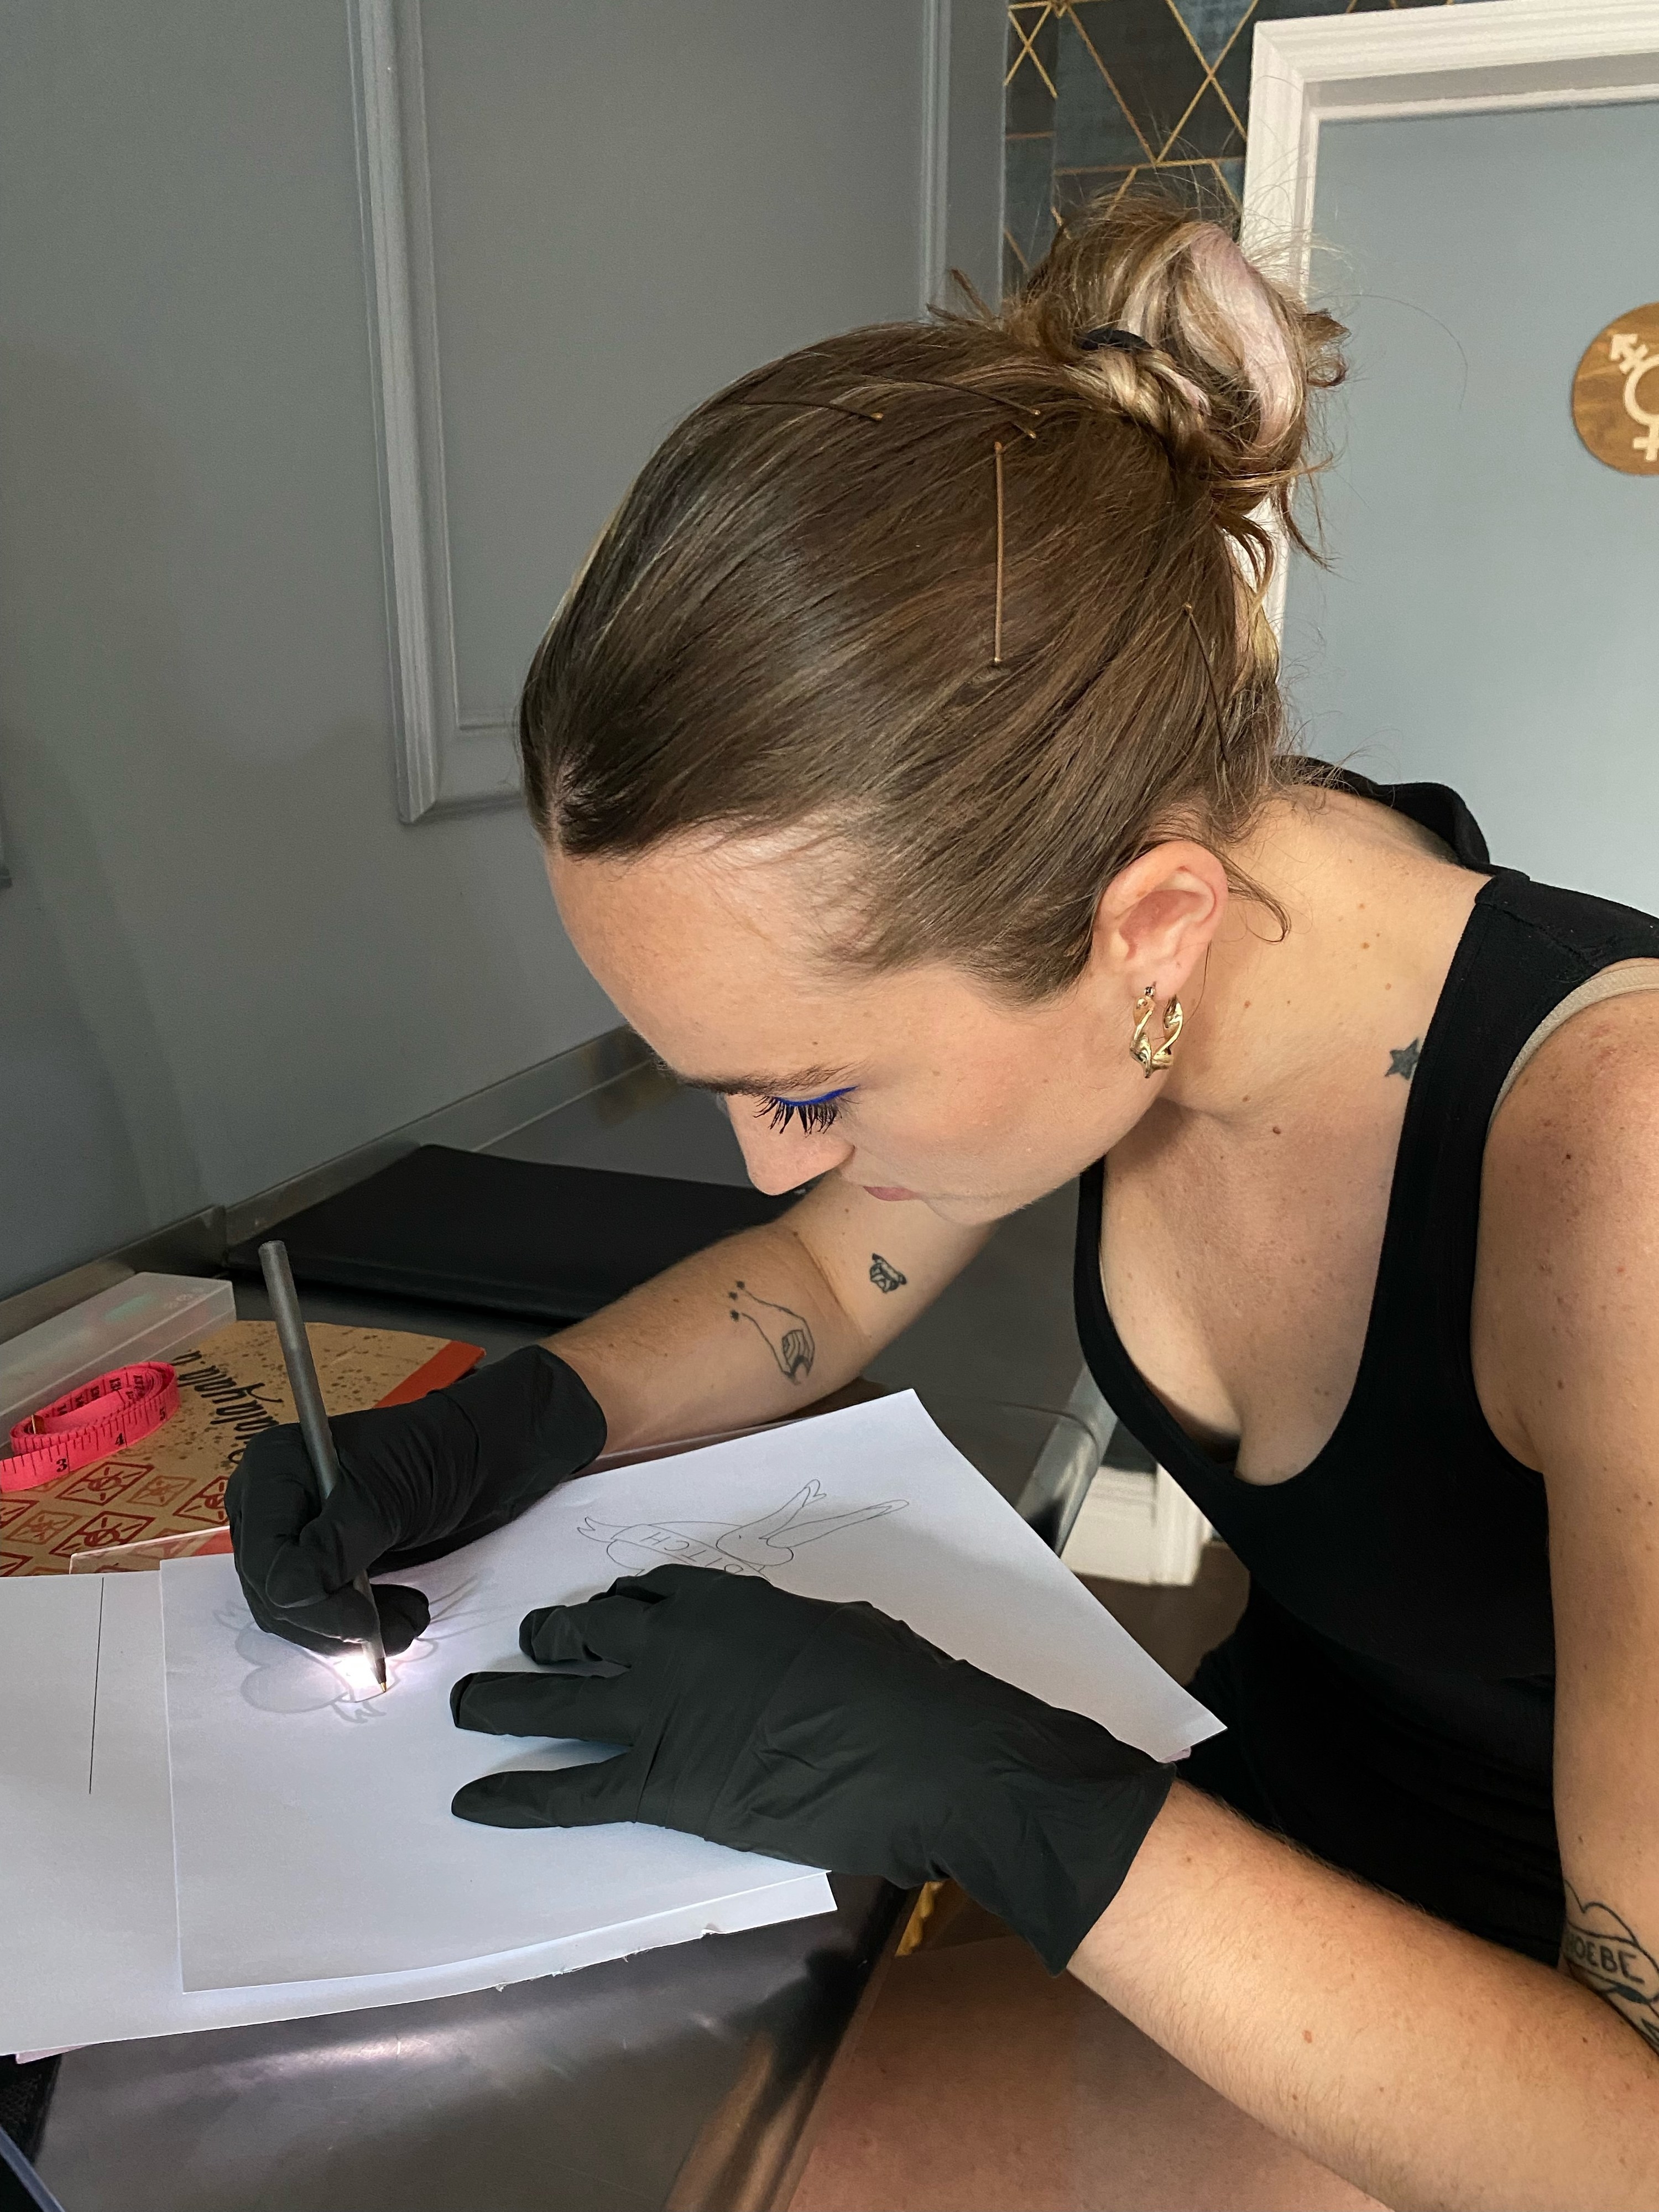 I Tattoo Apprenticed For A Day And Here's What I Learned